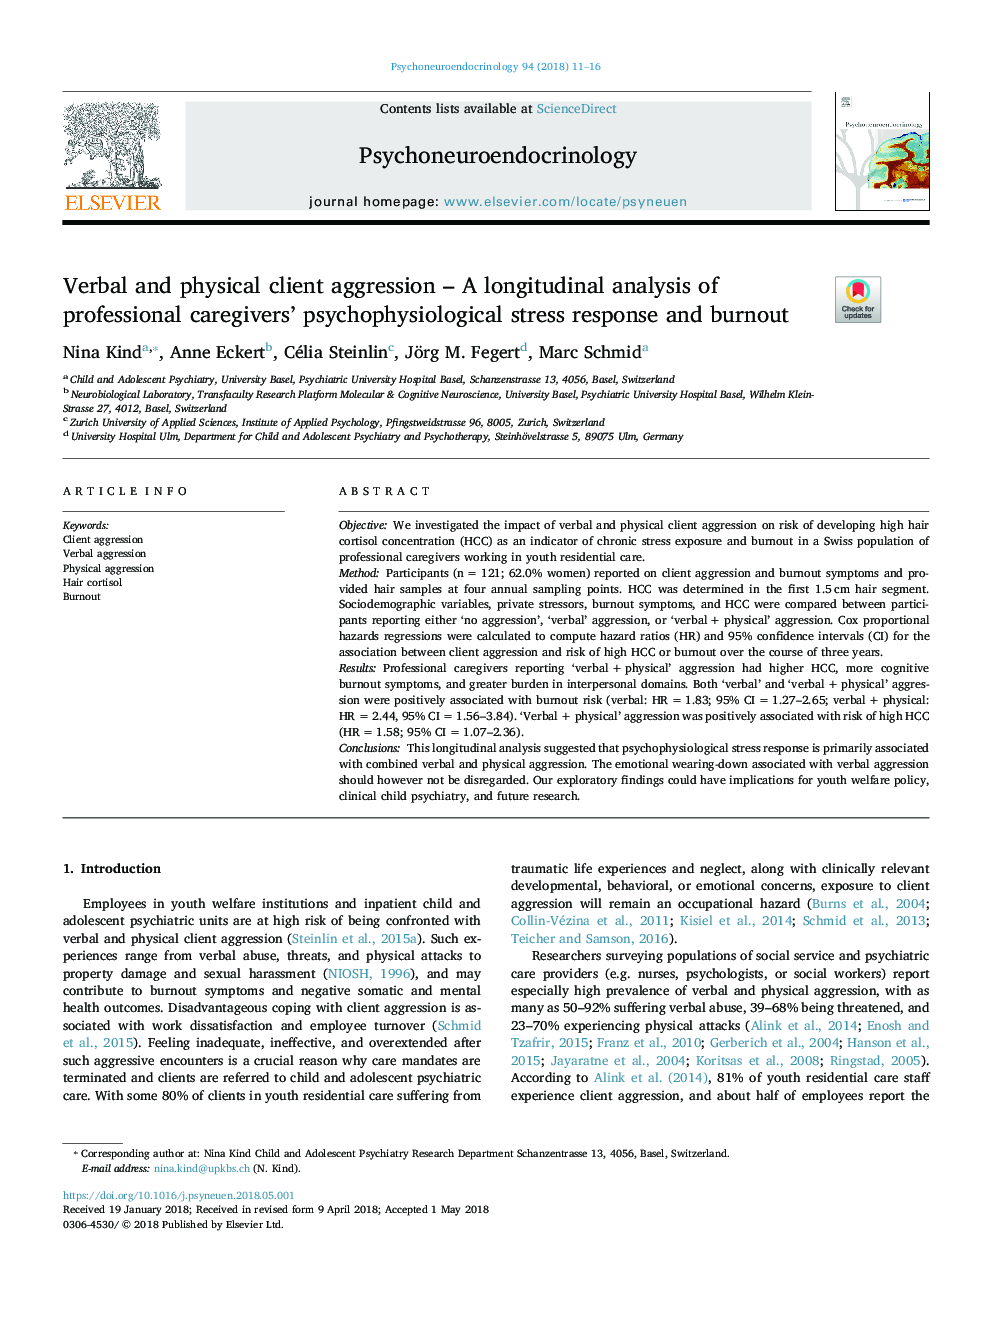 Verbal and physical client aggression - A longitudinal analysis of professional caregivers' psychophysiological stress response and burnout